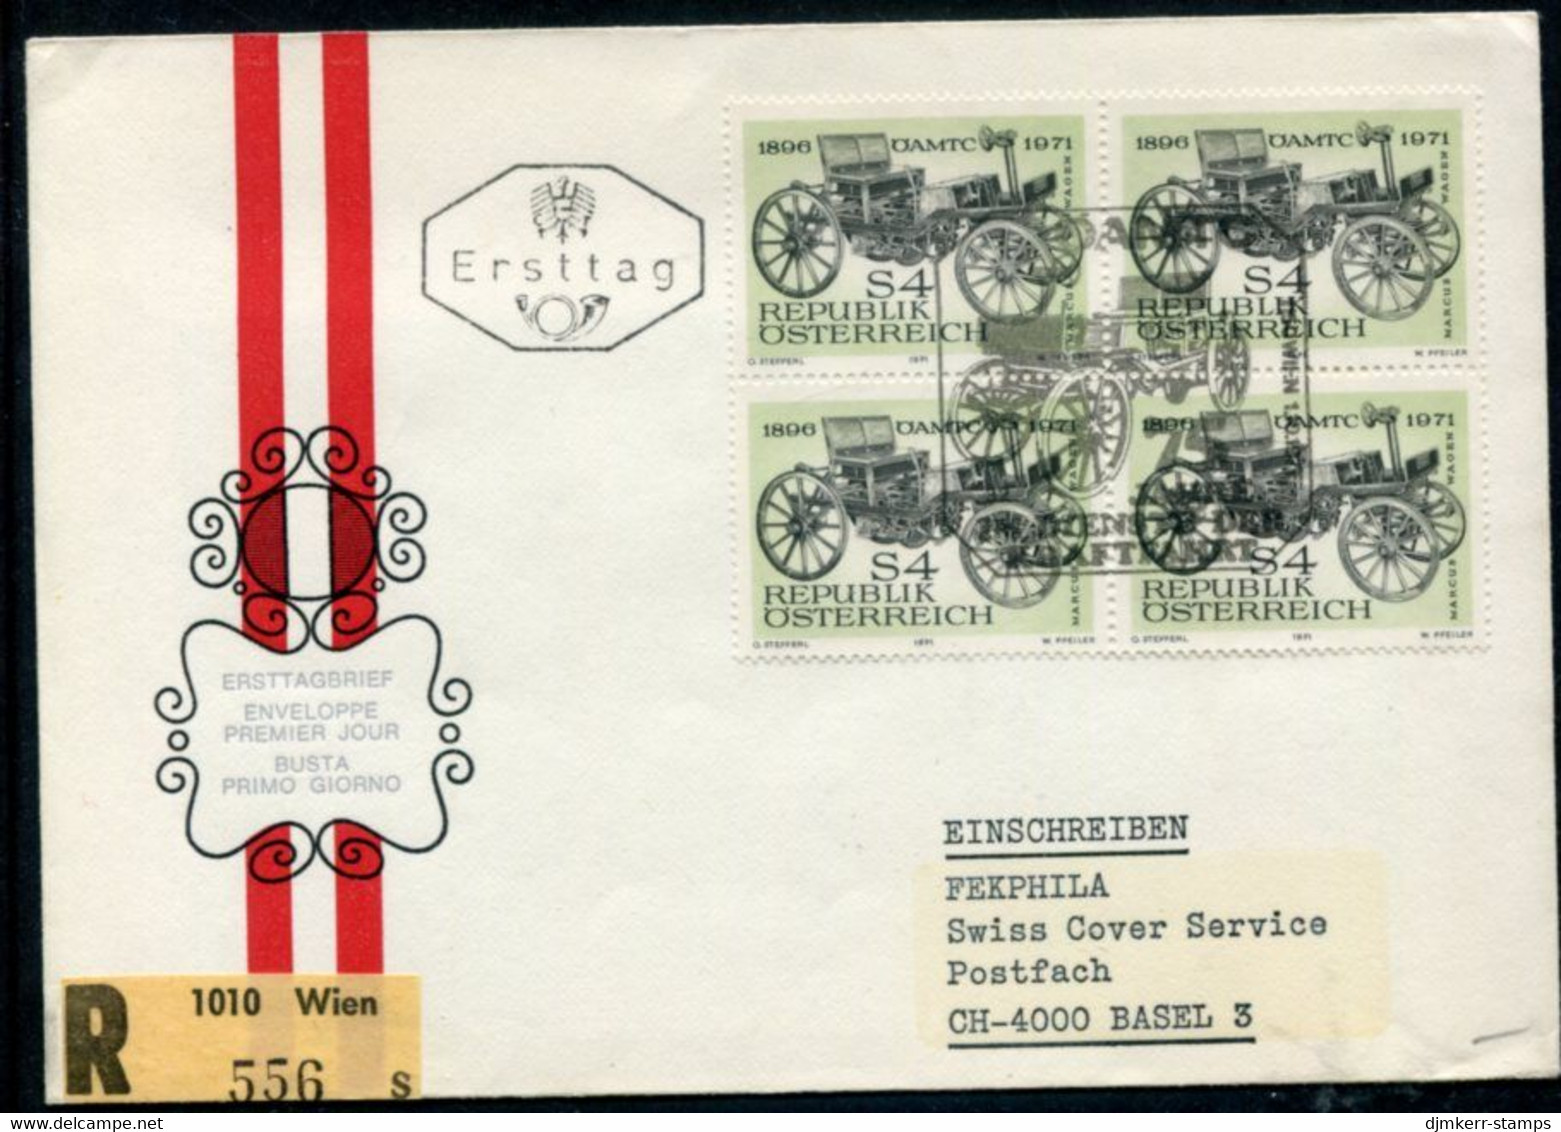 AUSTRIA 1971 Motor Touring Club Block Of 4 On FDC.  Michel 1371 - FDC